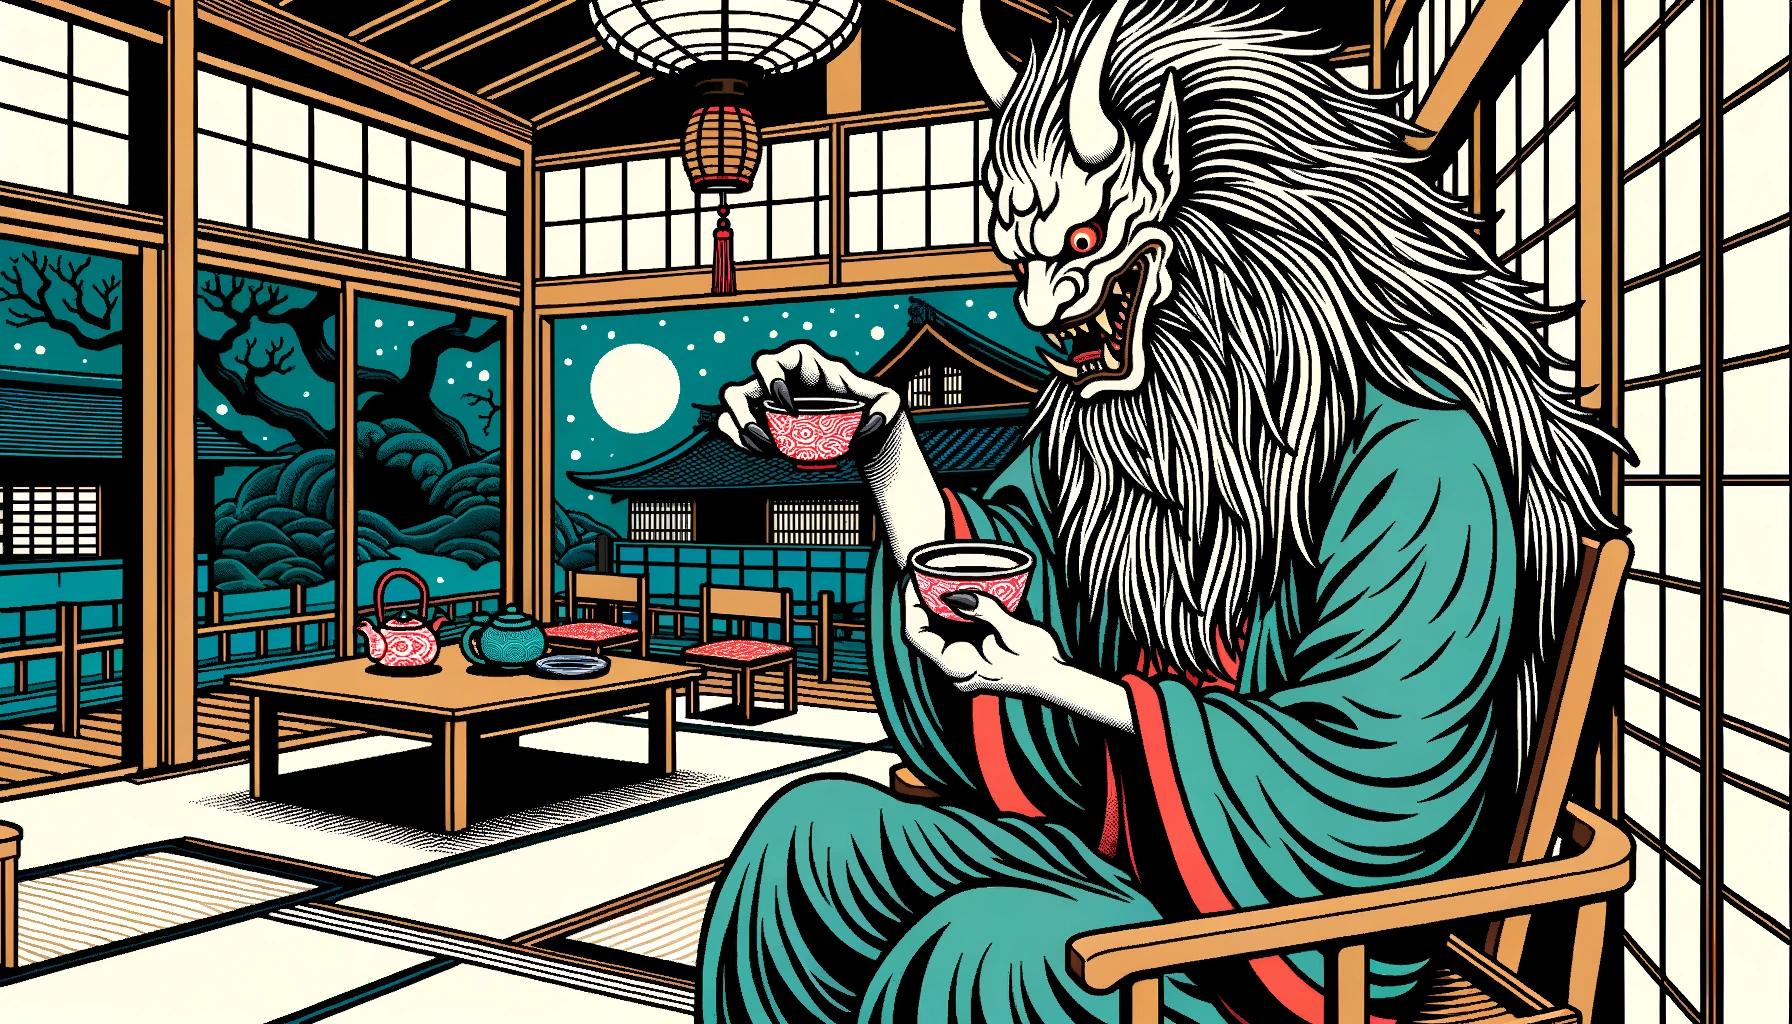 Nurarihyon Yokai: A Mysterious and Powerful Entity in Japanese Folklore